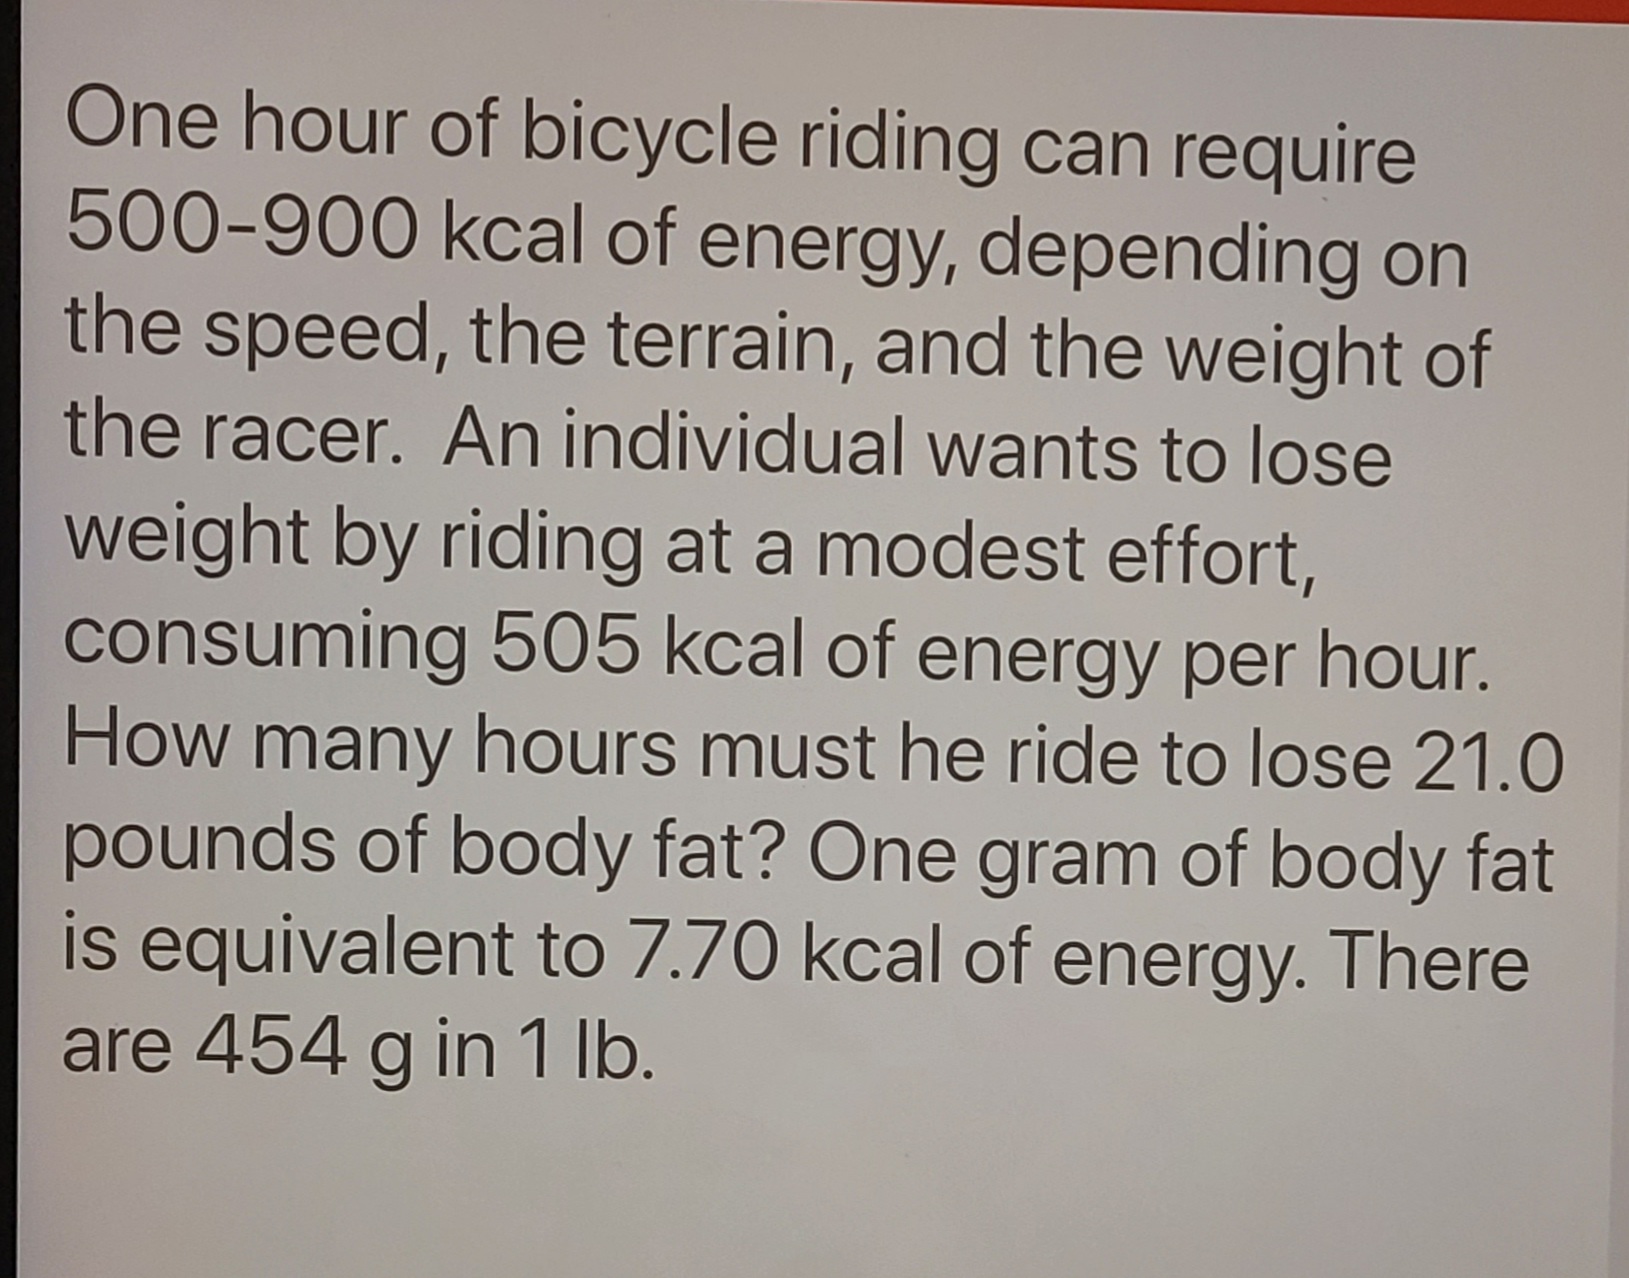 One hour of bicycle riding can require
500-900 kcal of energy, depending on
the speed, the terrain, and the weight of
the racer. An individual wants to lose
weight by riding at a modest effort,
consuming 505 kcal of energy per hour.
How many hours must he ride to lose 21.0
pounds of body fat? One gram of body fat
is equivalent to 7.70 kcal of energy. There
are 454 g in 1 lb.
